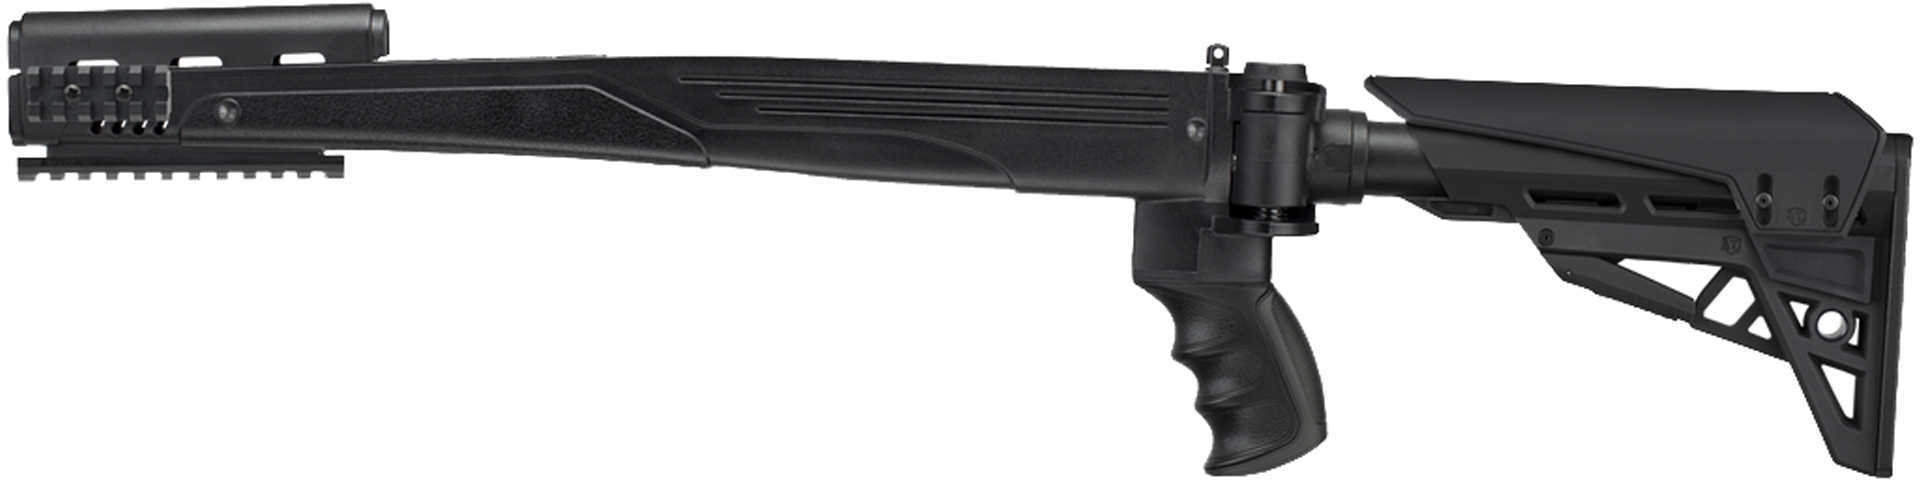 ATI Outdoors B2101232 Strikeforce Black Synthetic Chassis With Fully Adjustable Folding Stock, X-1 Style Grip, Fits SKS